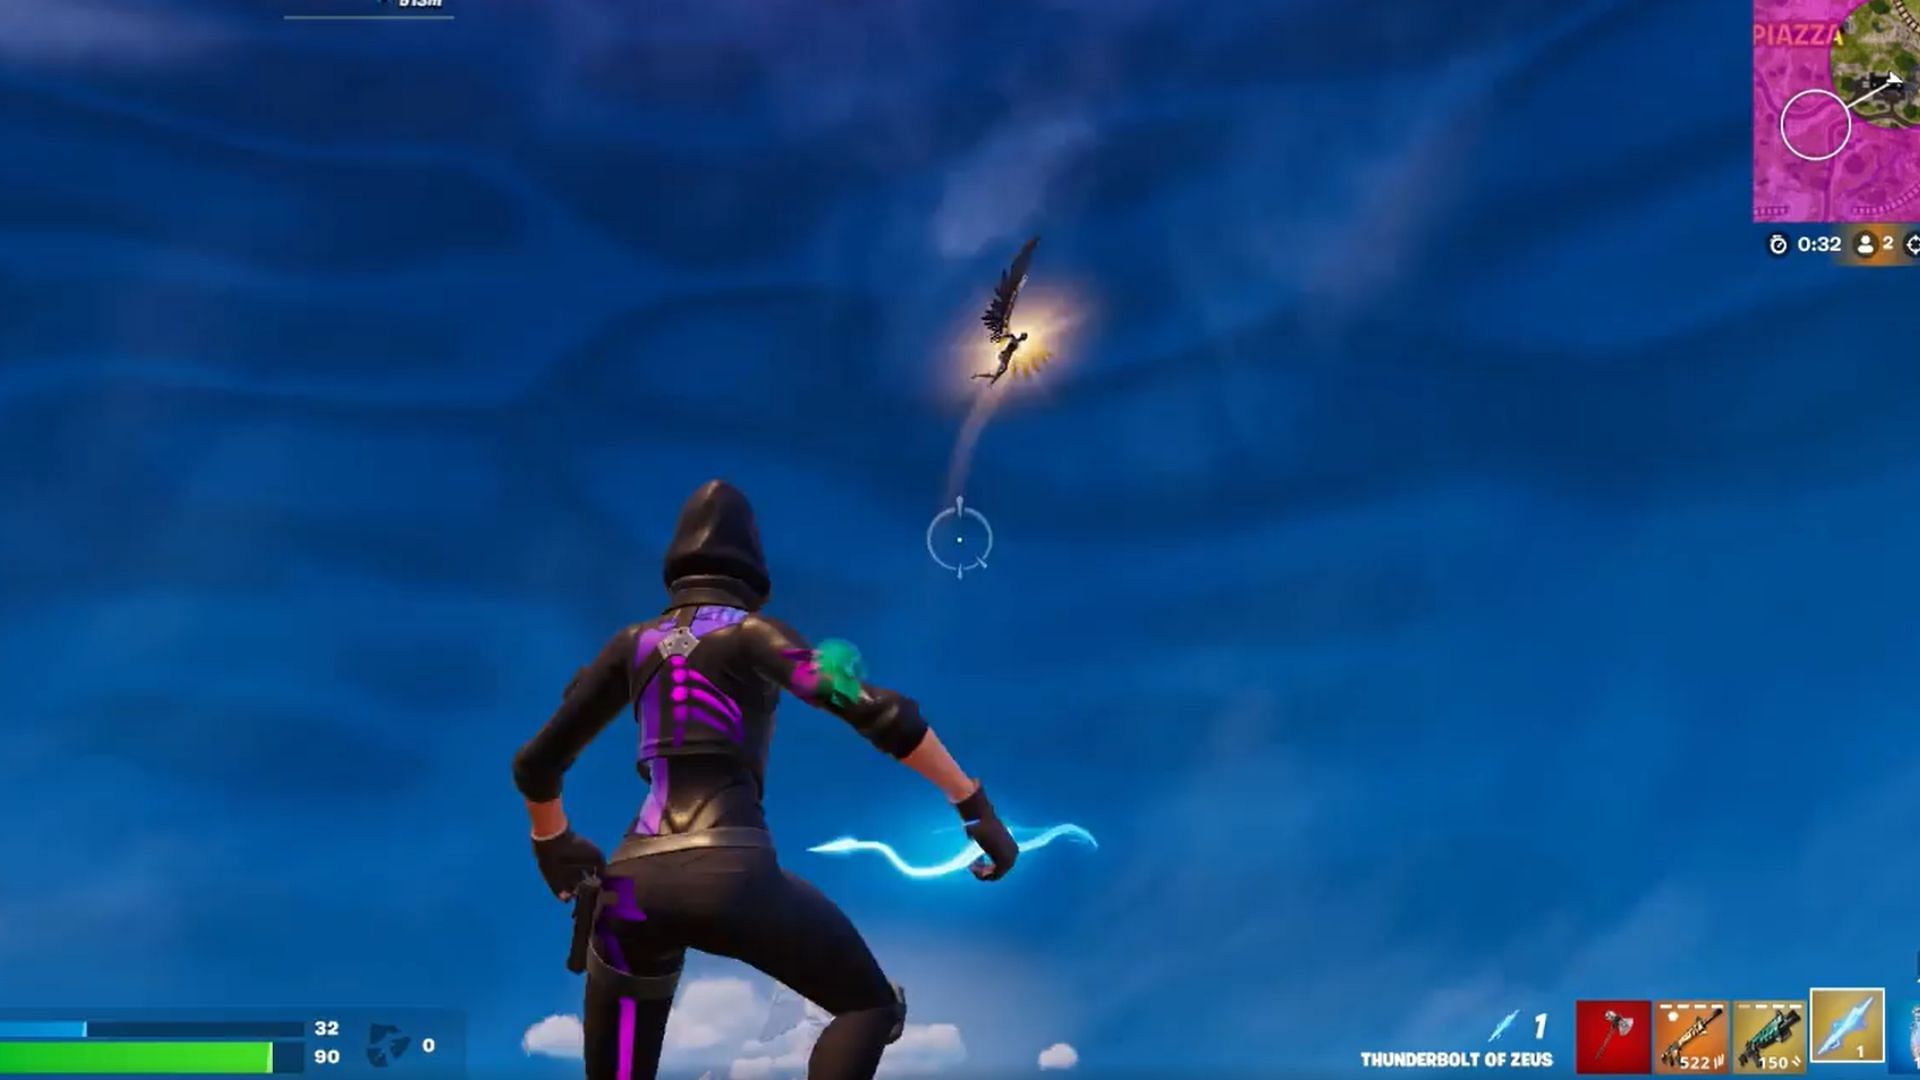 &quot;Electric type is super effective against flying type&quot;: Fortnite player gets an incredible Victory Royale using Thunderbolt of Zeus